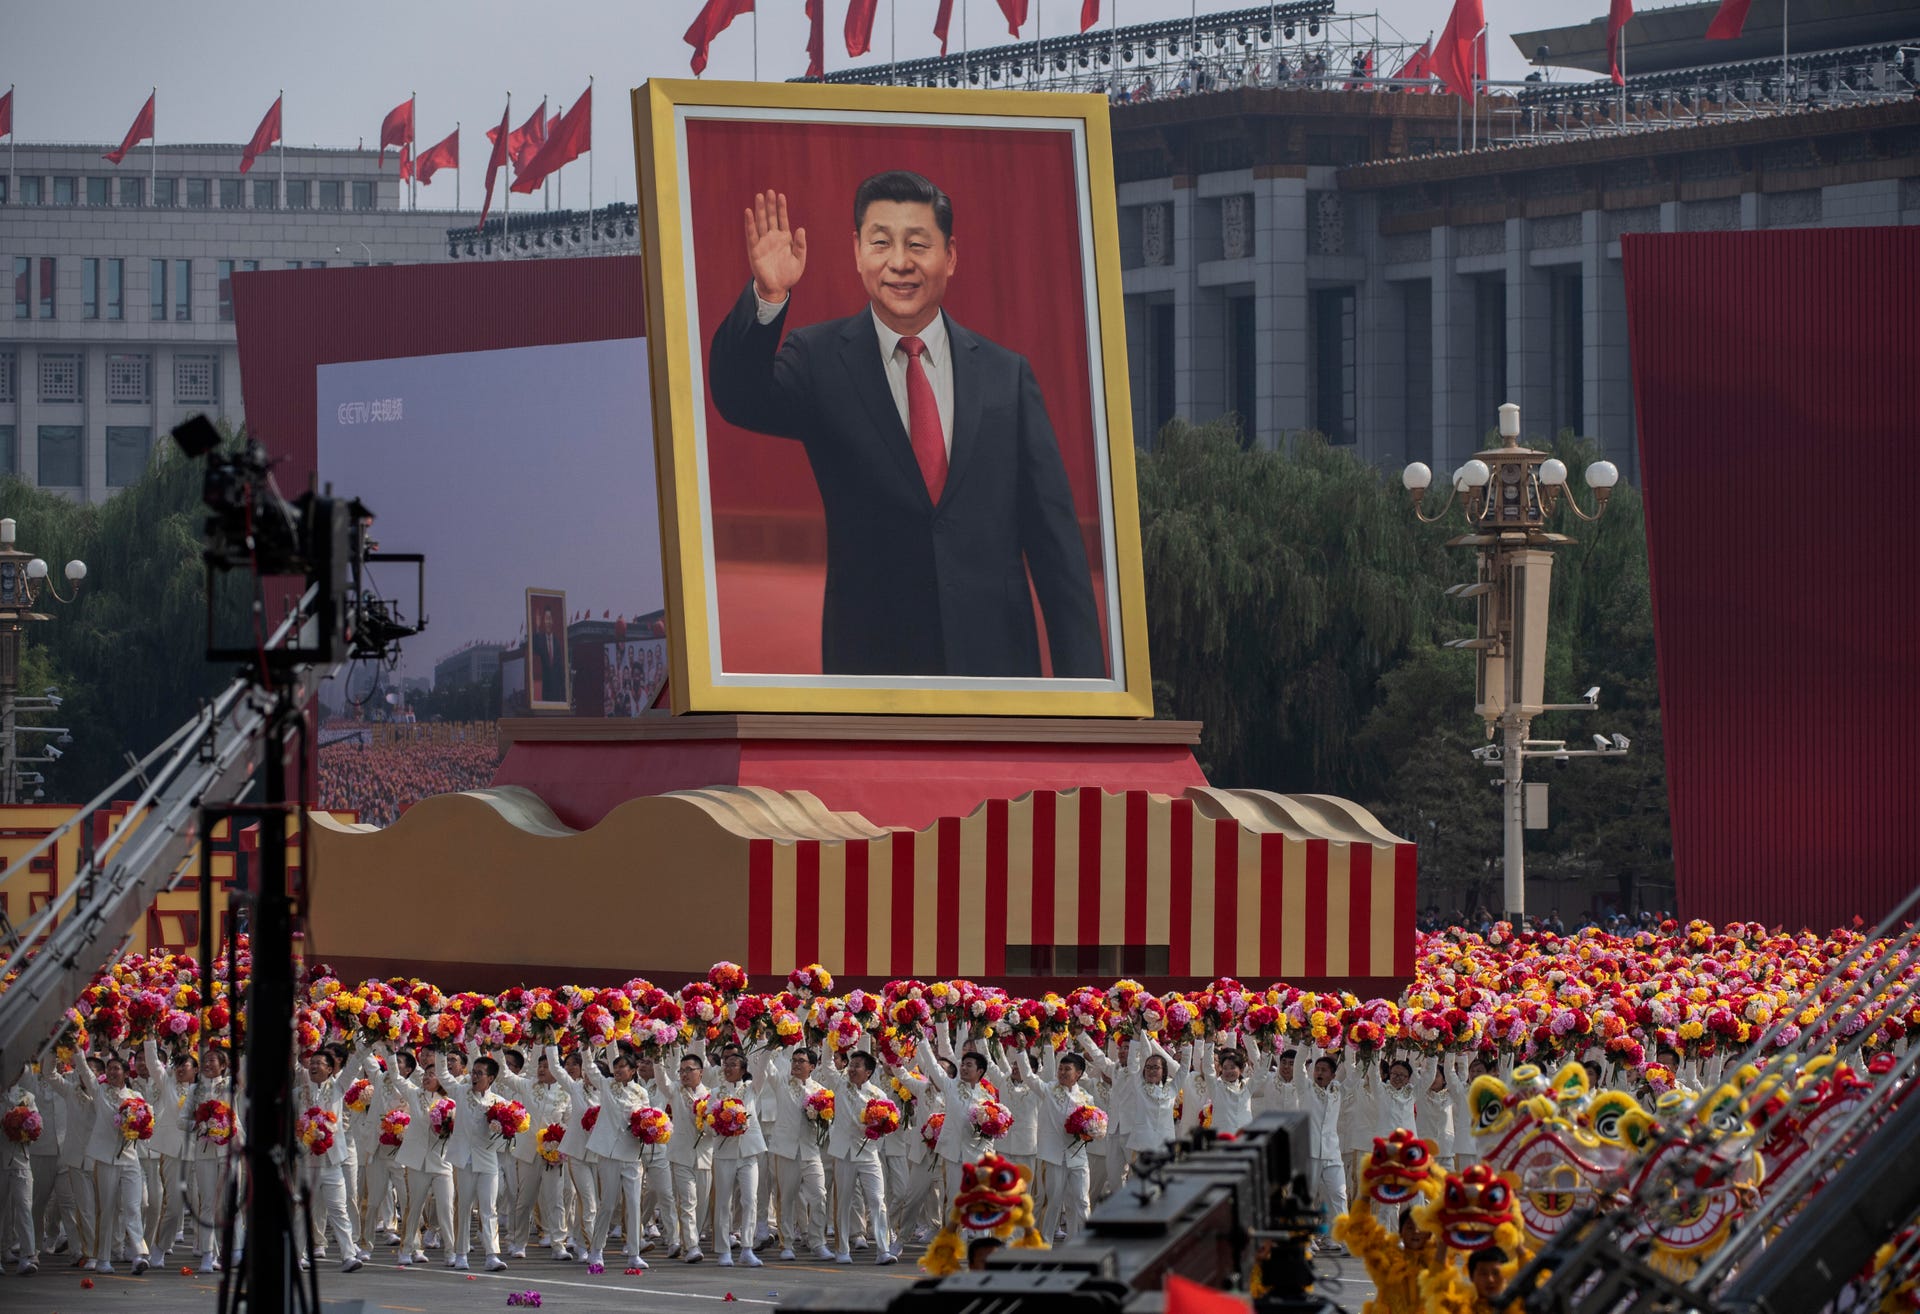 Billboard-sized portrait of Chinese President Xi Jinping at an outdoor ceremony.